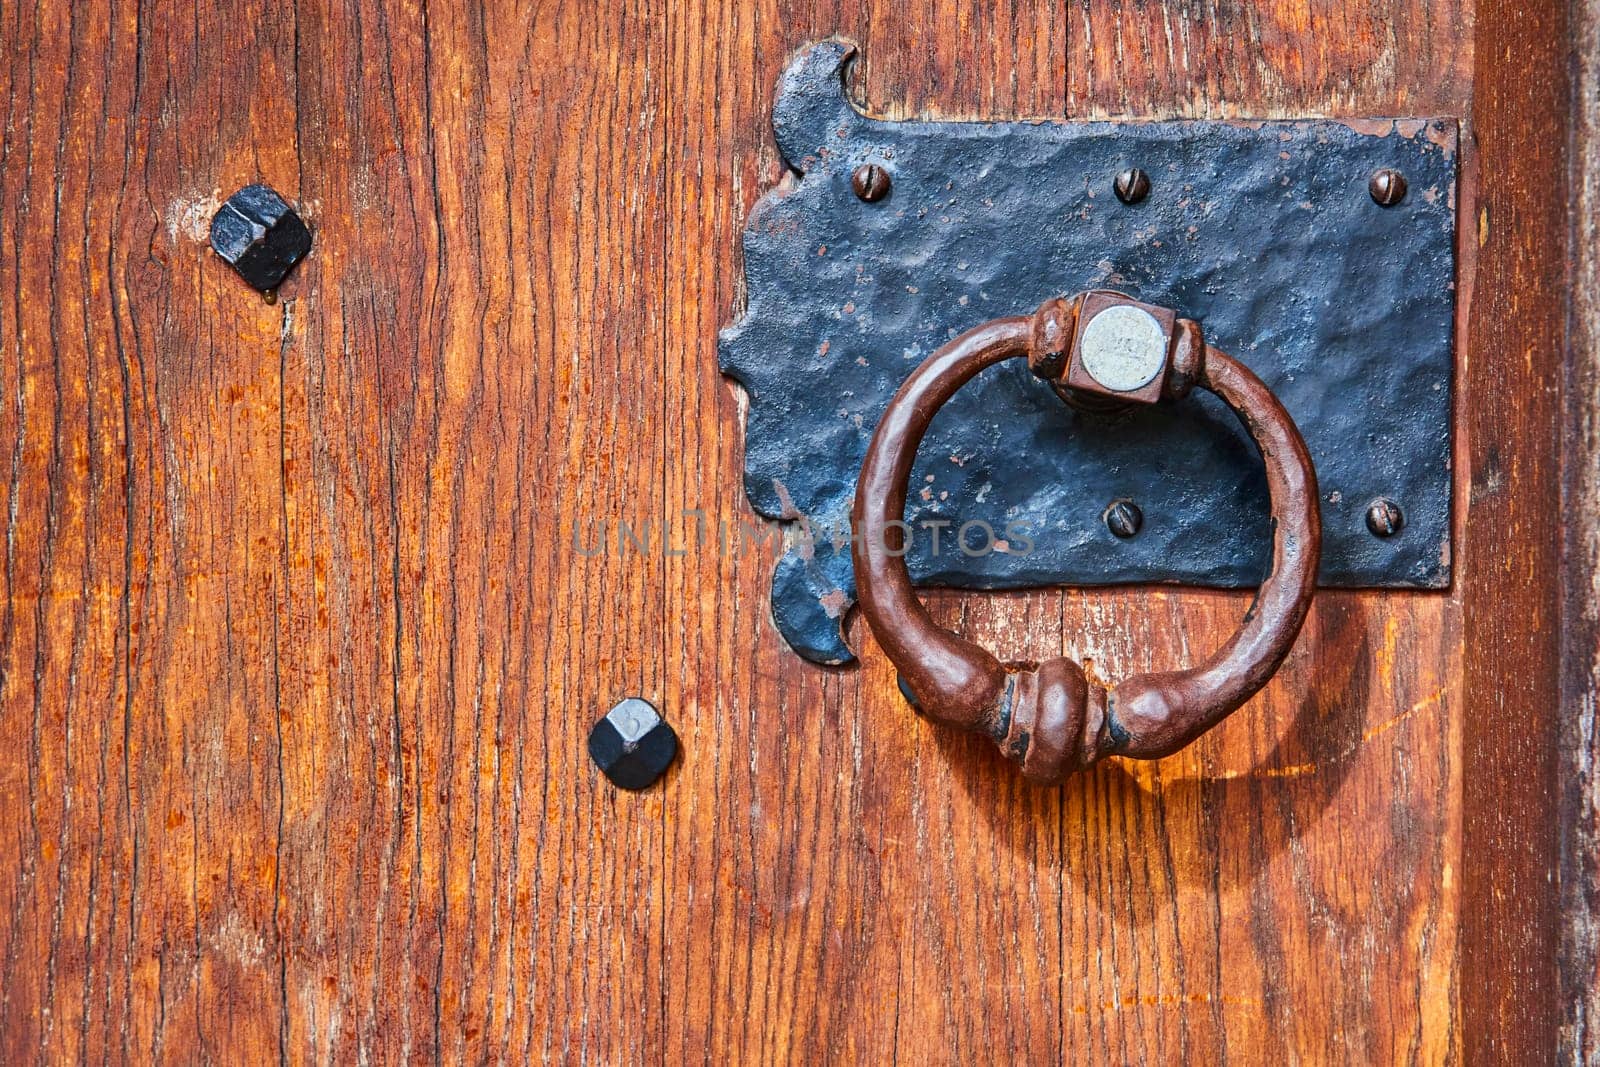 Vintage Iron Door Knocker on Rustic Wood at a Historic Indiana Seminary, Symbol of Heritage and Privacy